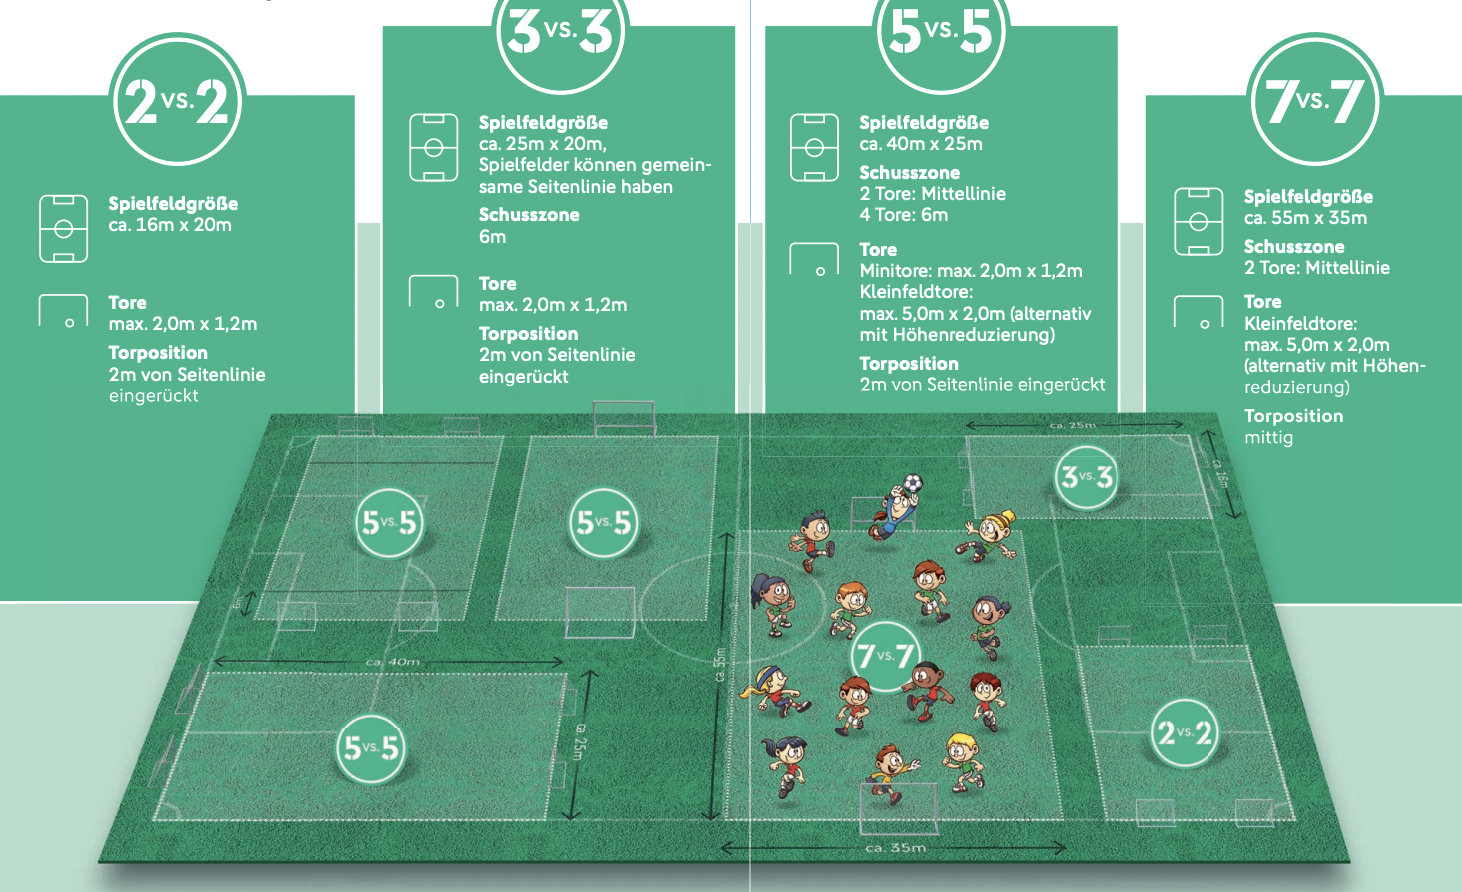 Specifications for the DFB's new game formats. 7 v 7 isn't permitted until the U10s and U11s.